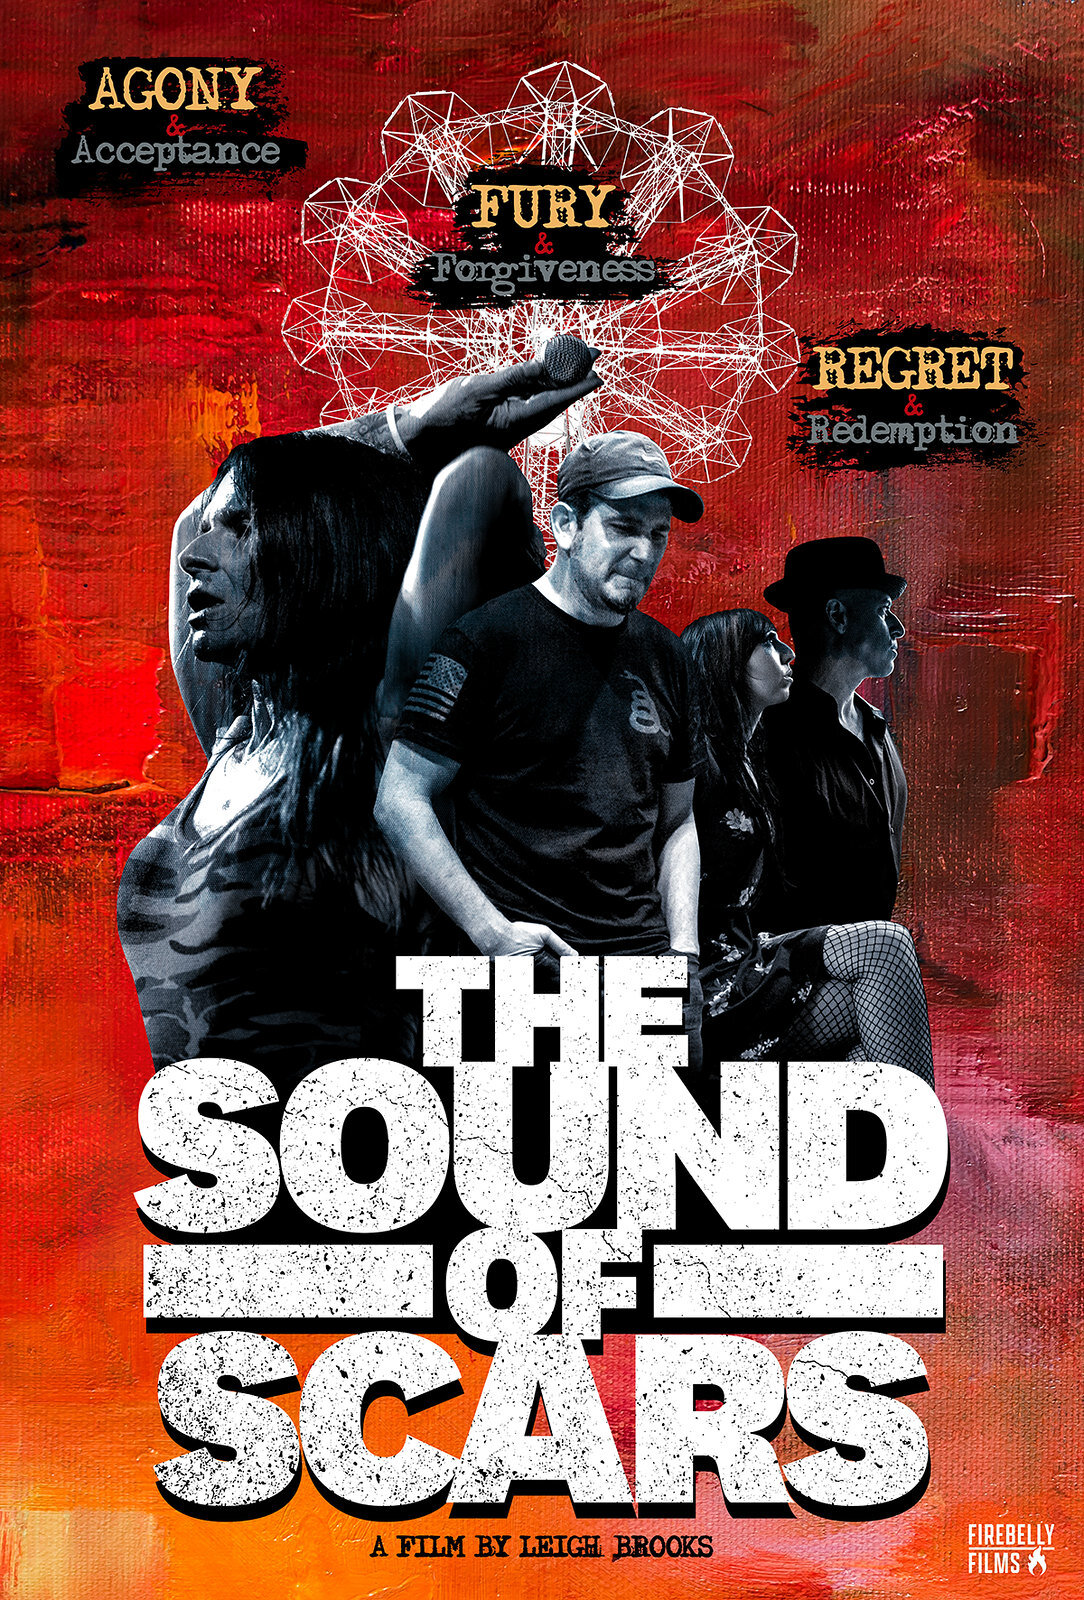 Life of Agony - The Sound of Scars Film Poster